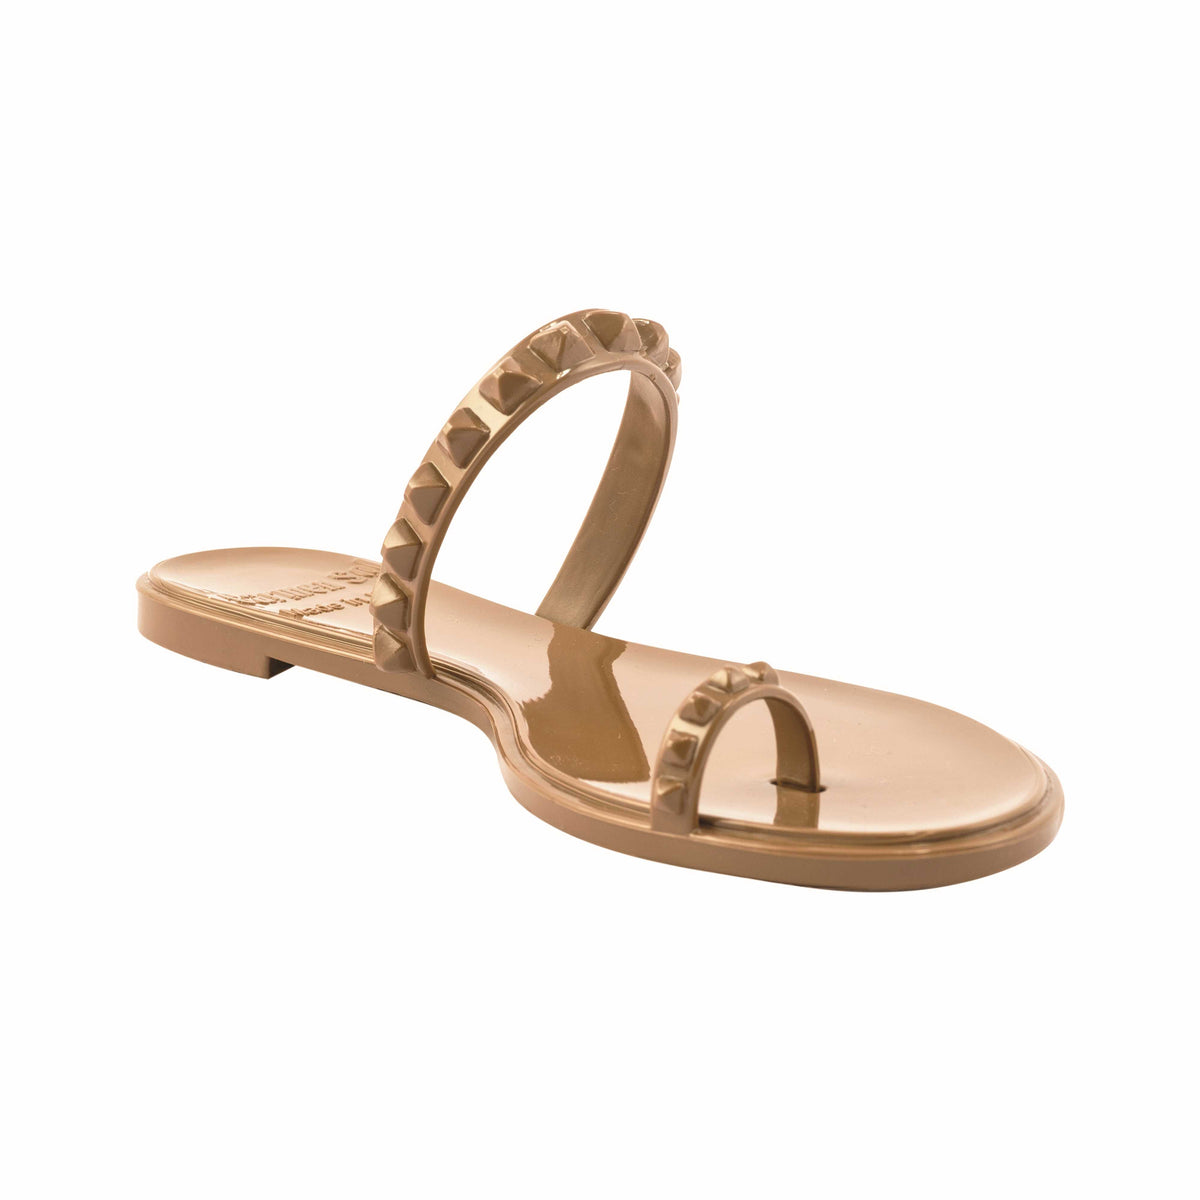 Maria jelly nude sandals from Carmen Sol, womens shoes